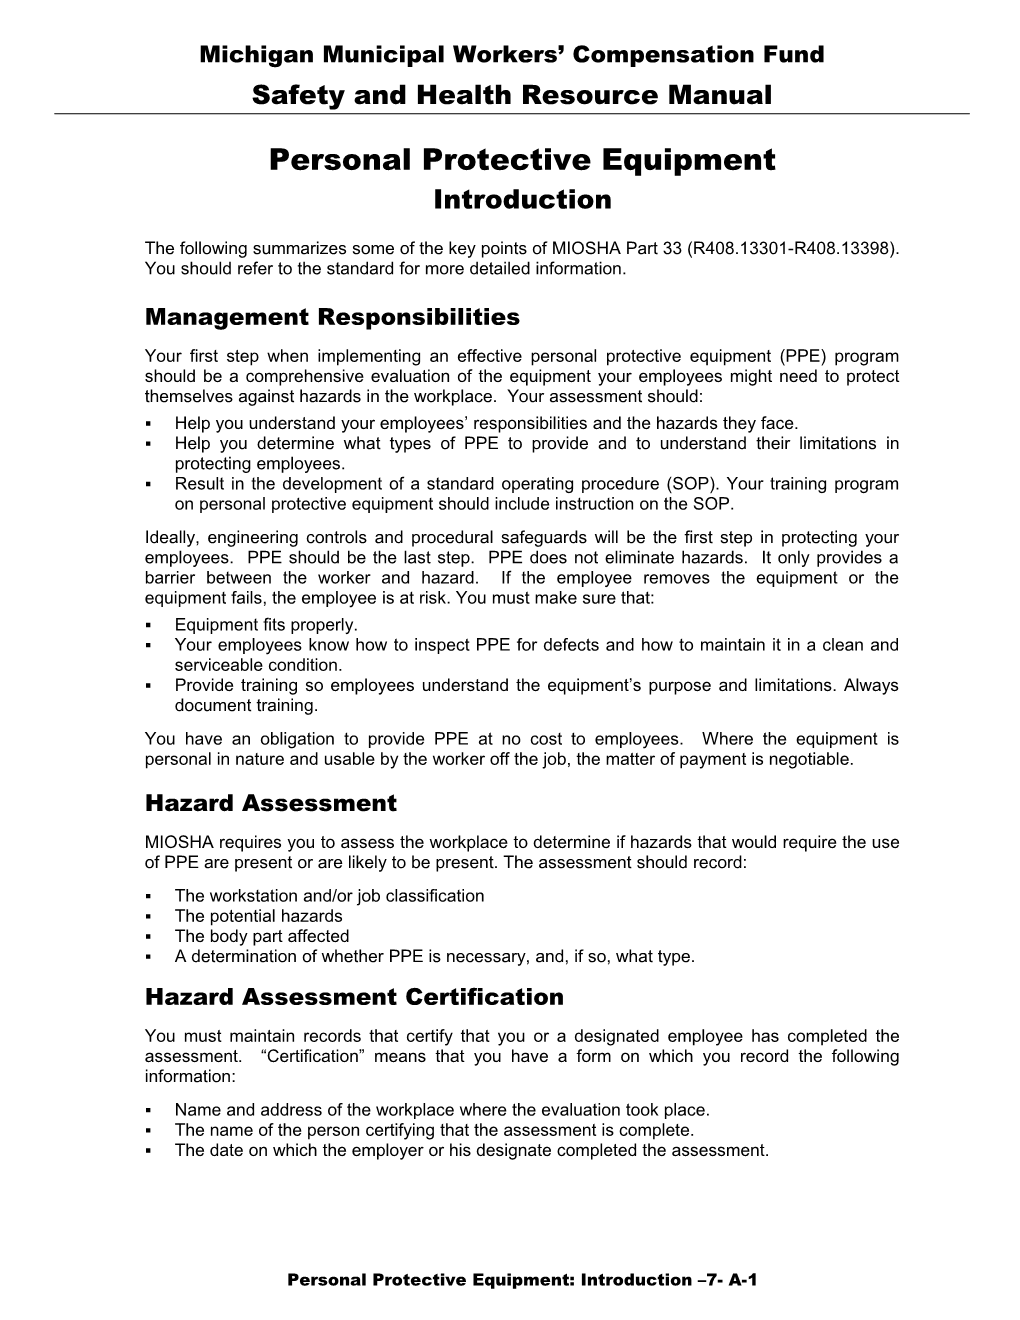 Personal Protective Equipment s3